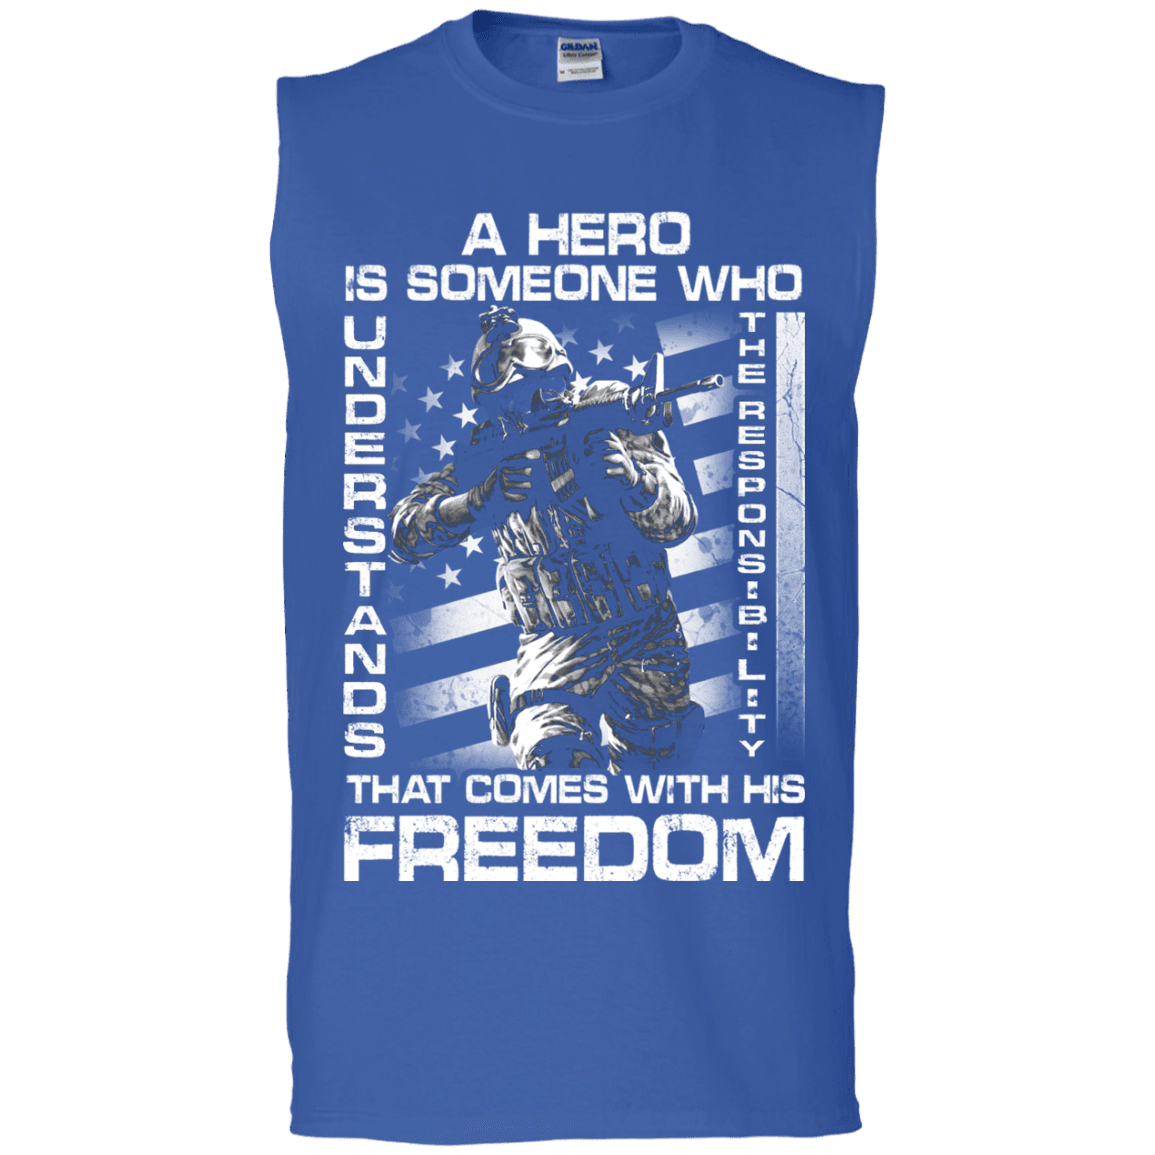 Military T-Shirt "A Hero Is Someone Who Understands The Responsibility"-TShirt-General-Veterans Nation